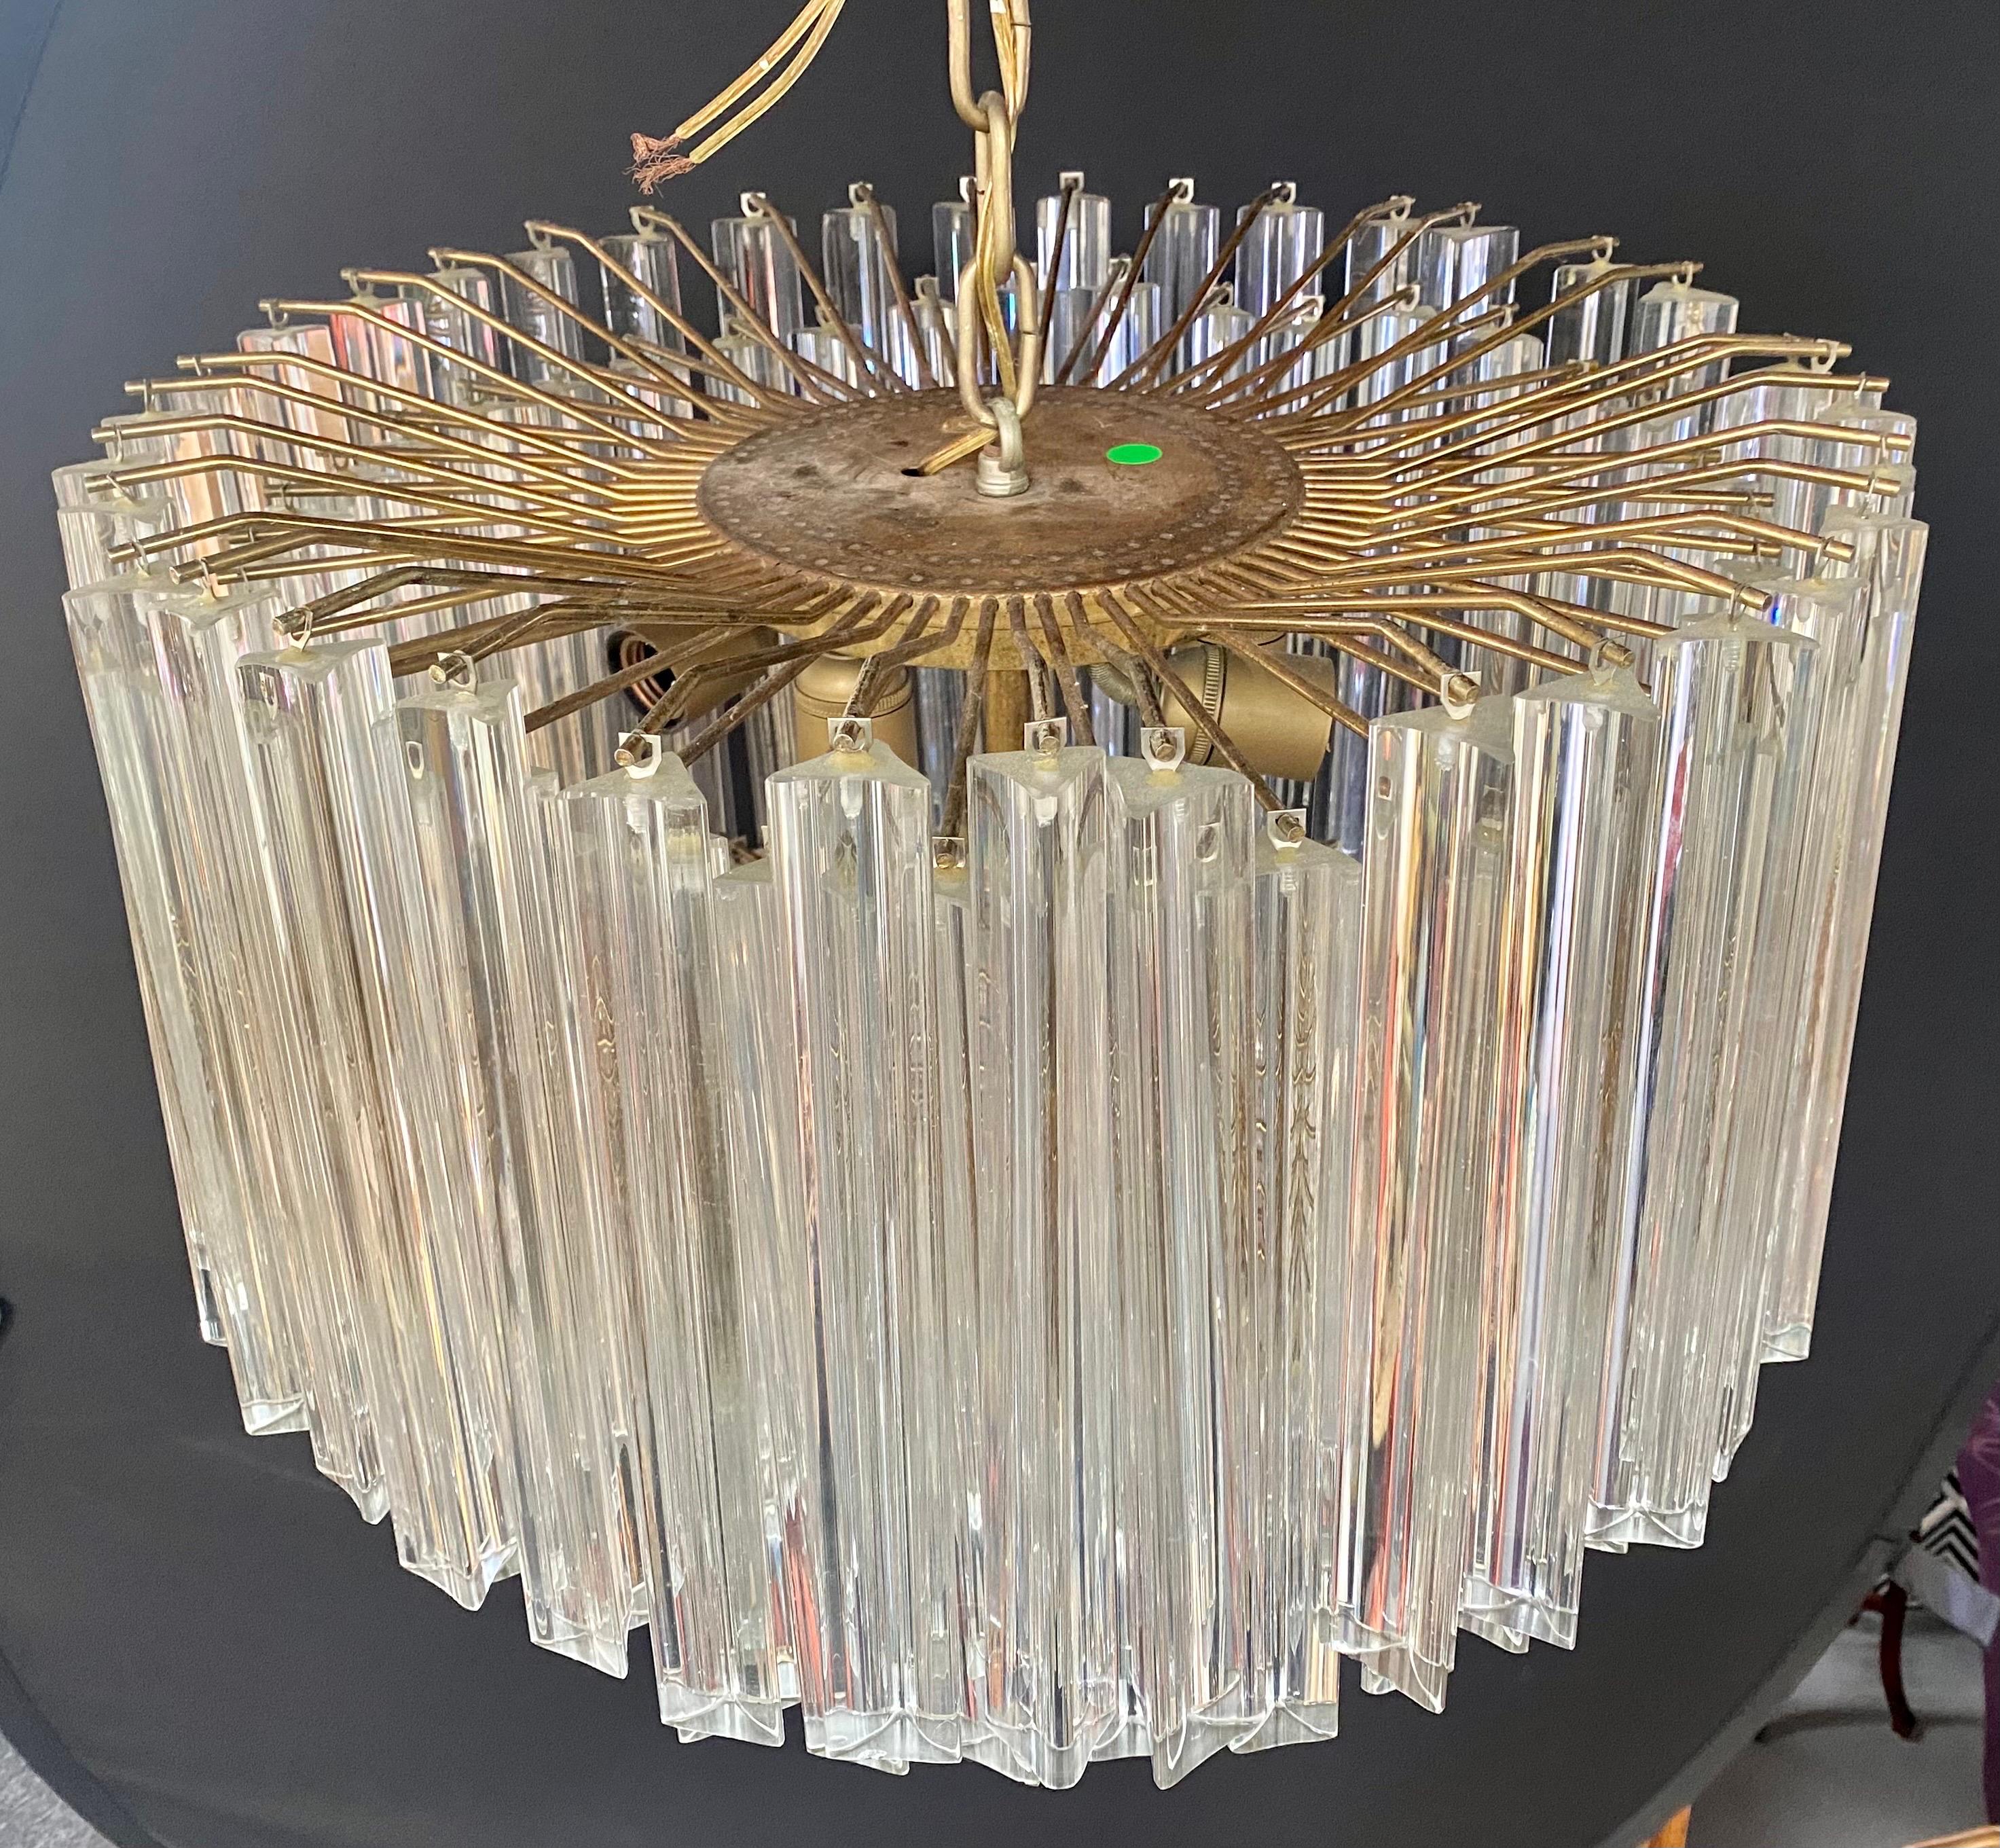 A Mid-Century Modern chandelier by Venini ( Founded 1921 in Milan, Italy by Paolo Venini and Giacomo Cappellin). The oval shaped chandelier is made of individual Murano glass prisms creating a Cascade shape of 7 tiers. The MCM chandelier takes 5